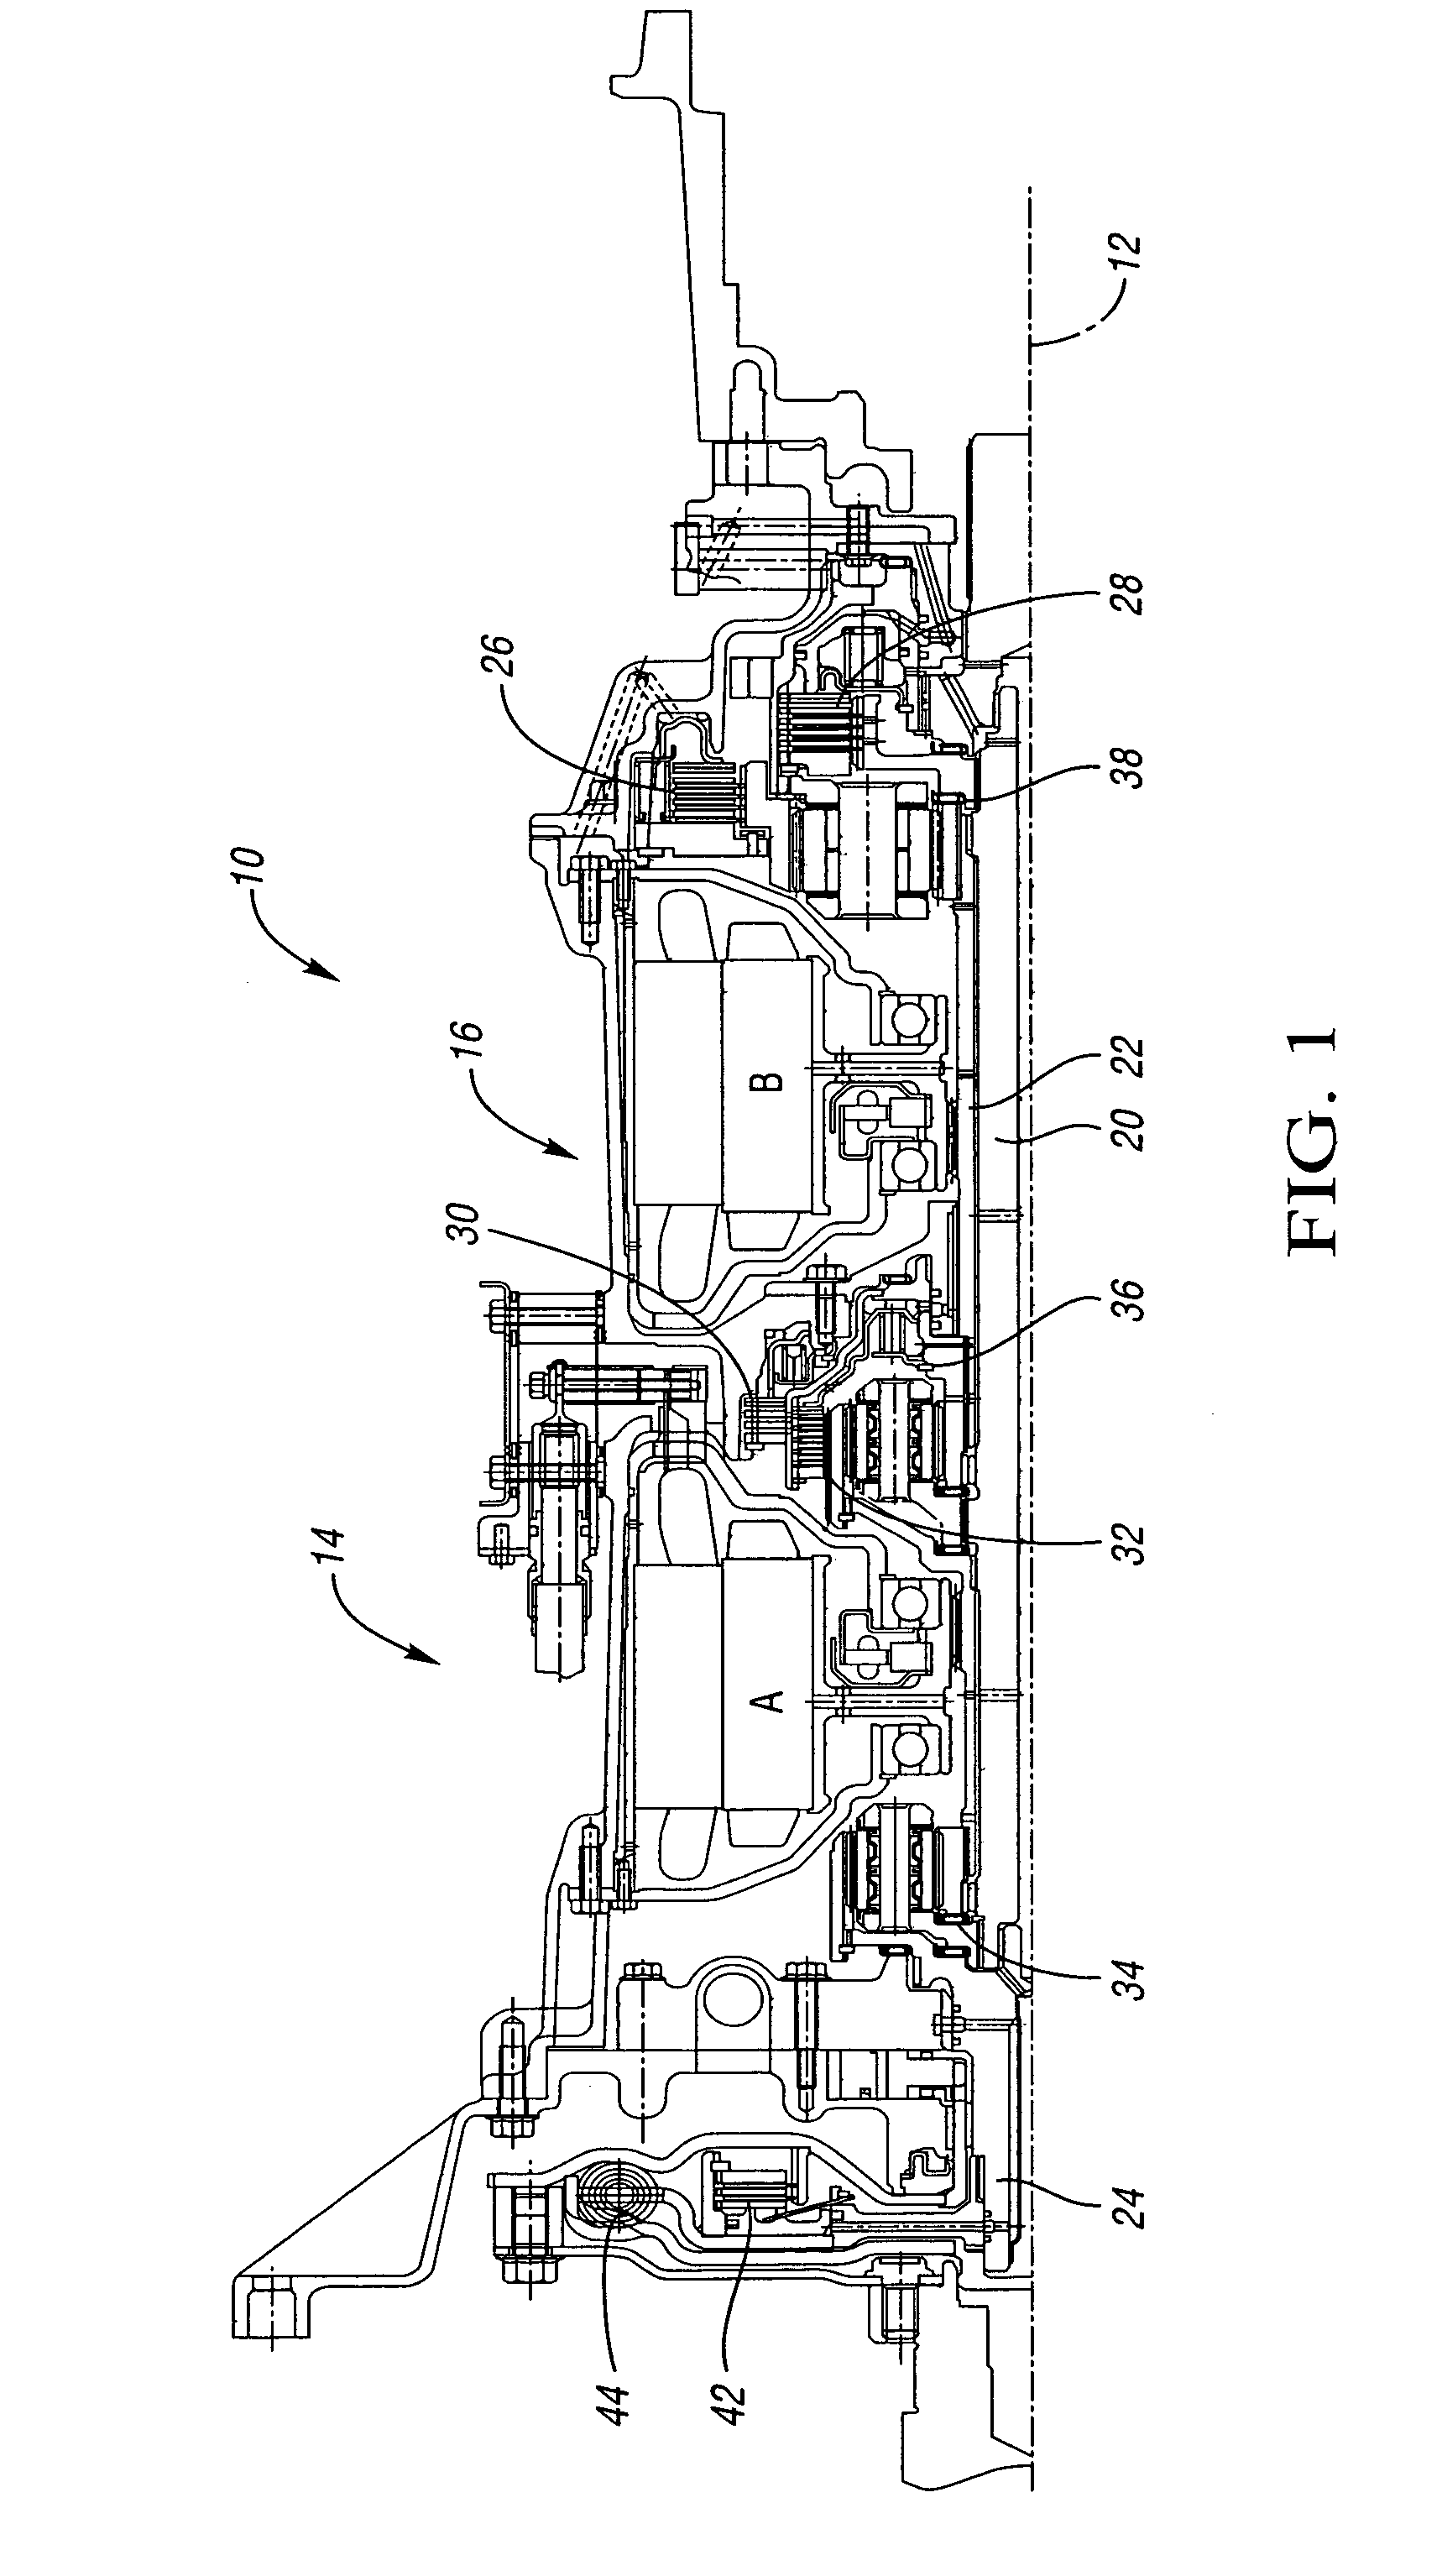 Method and apparatus for cooling a hybrid transmission electric motor